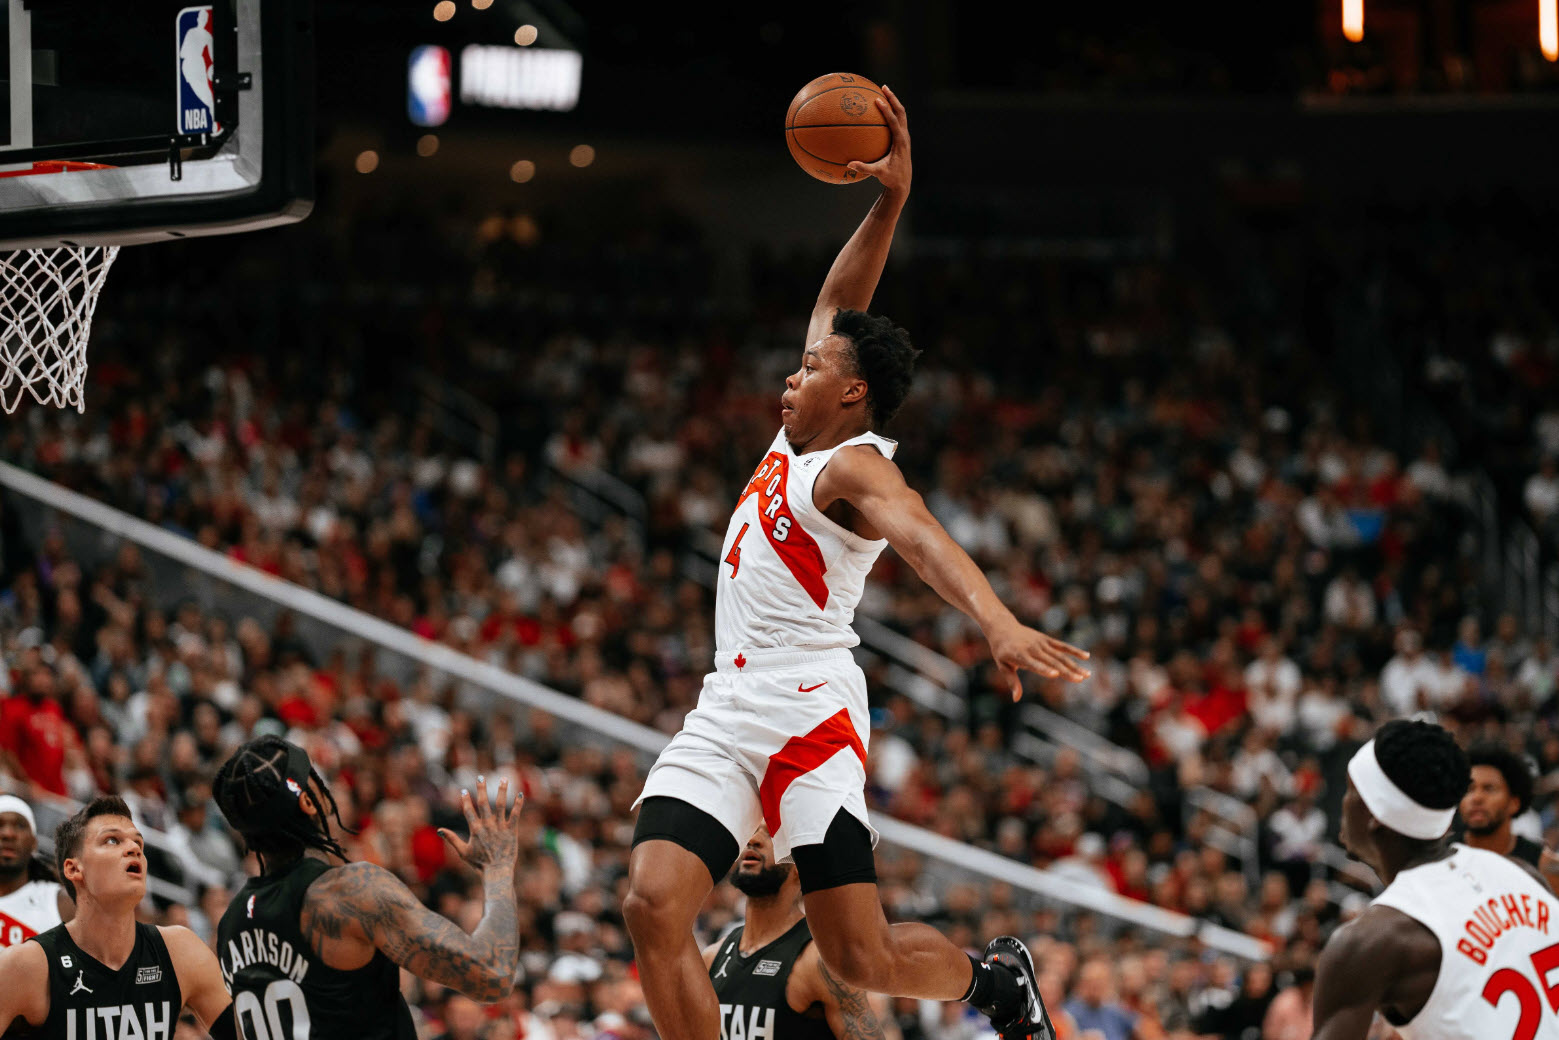 RAPTORS FAMILY: OG ANUNOBY DESERVED TO BE FIRST TEAM ALL DEFENSE